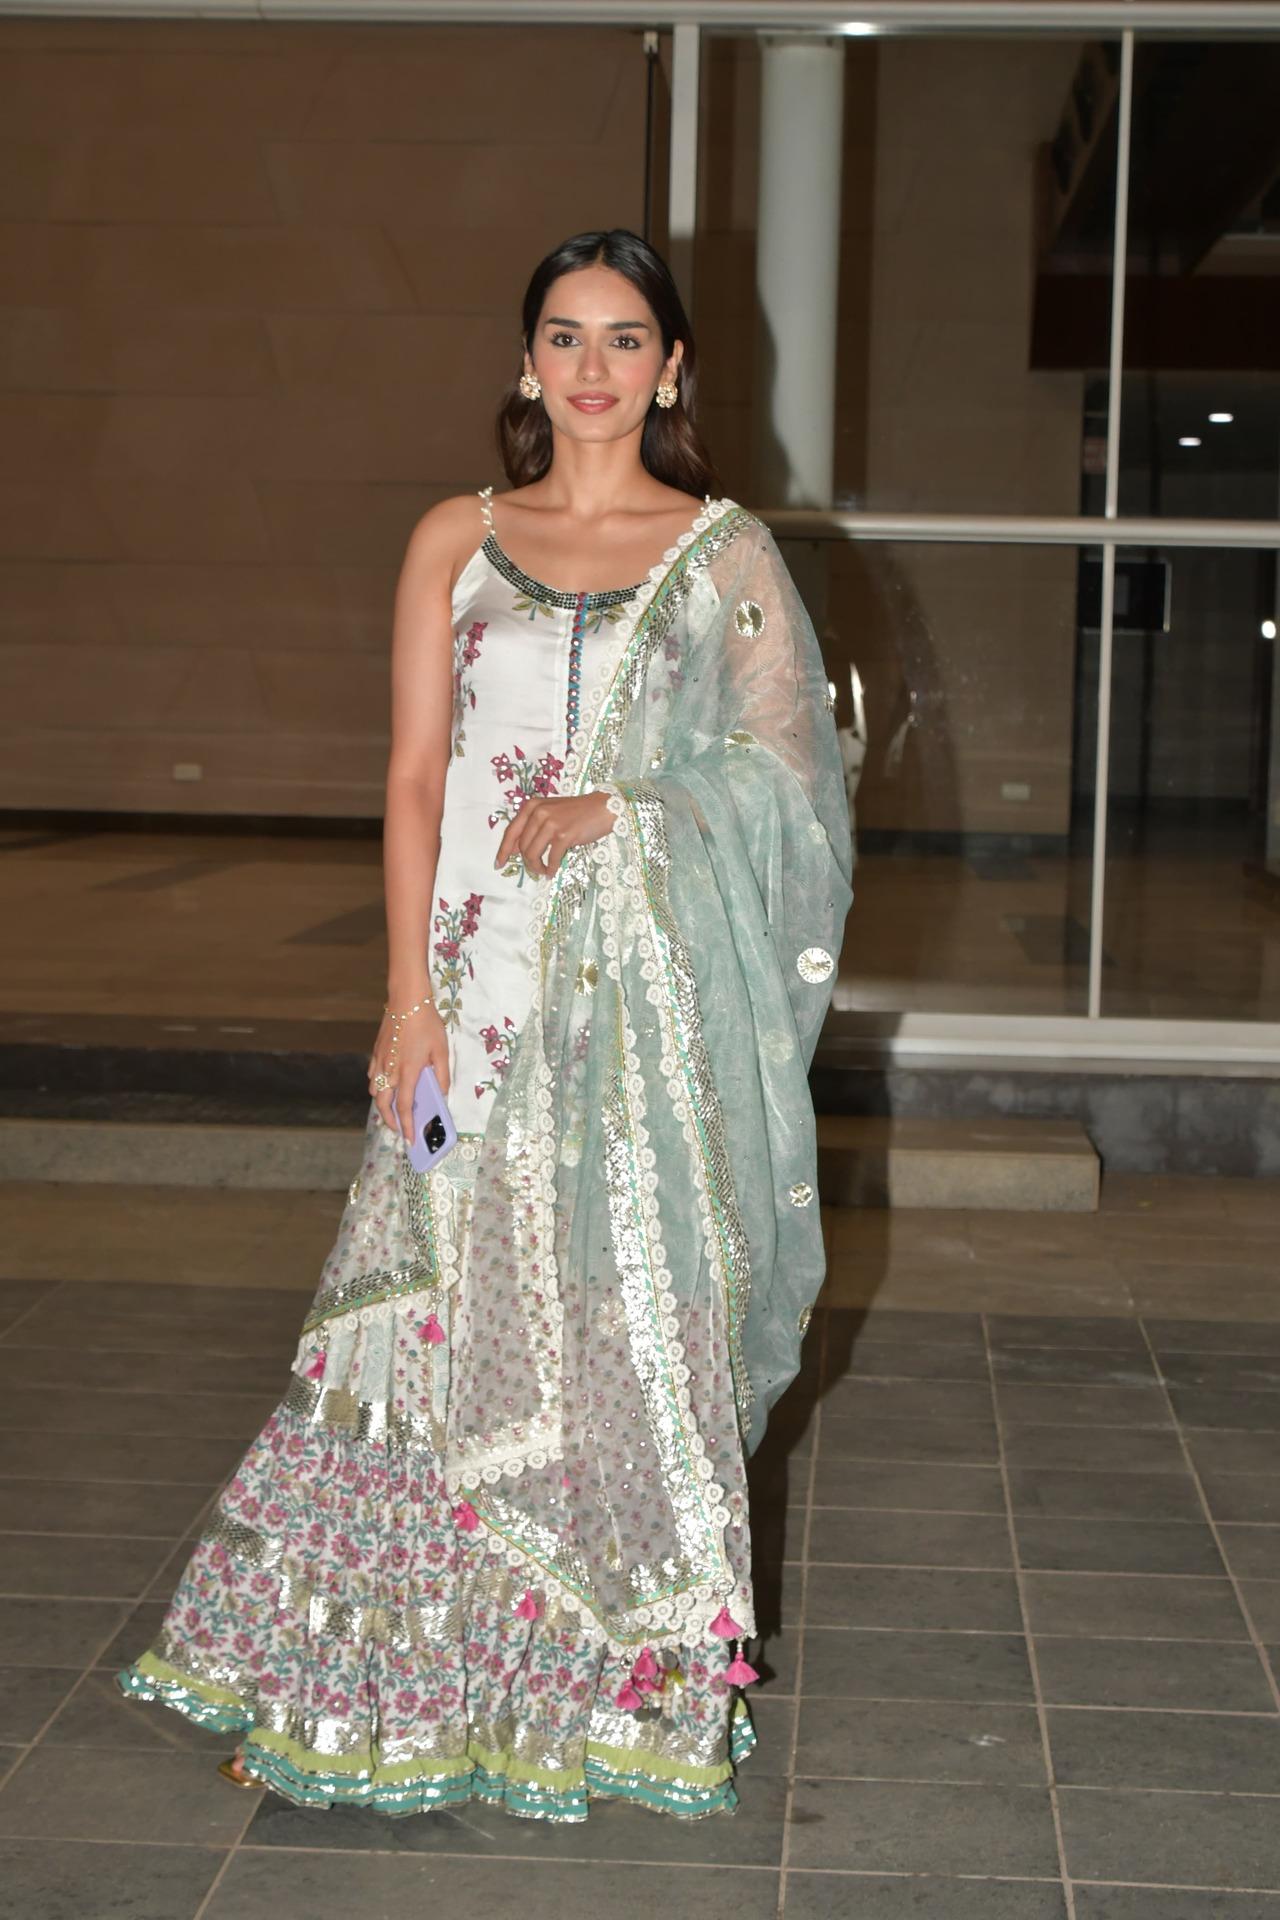 The film’s actress and former Miss World Manushi Chhillar sashayed in style at the event. 